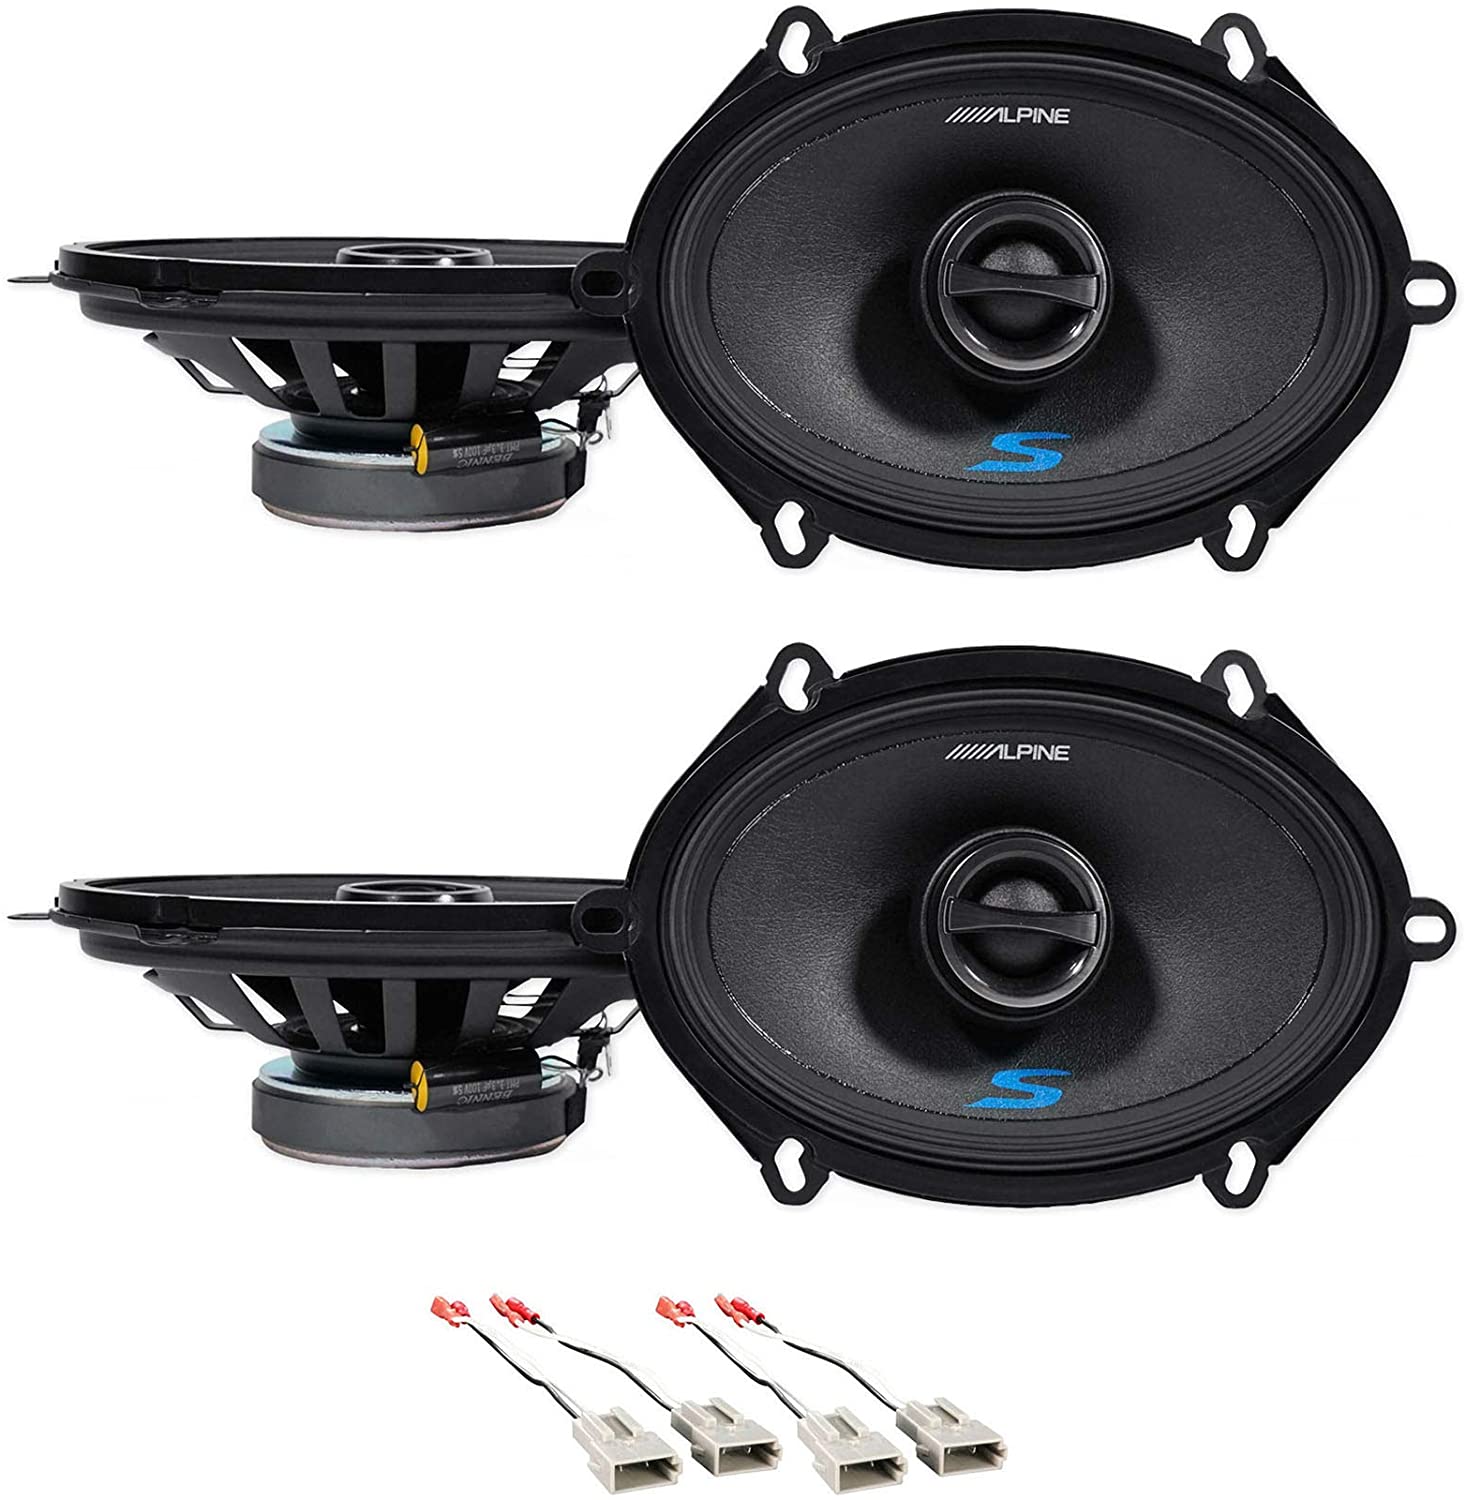 Front+Rear Alpine S 5x7" Factory Speaker Replacement Kit For 1993-2002 Mazda 626